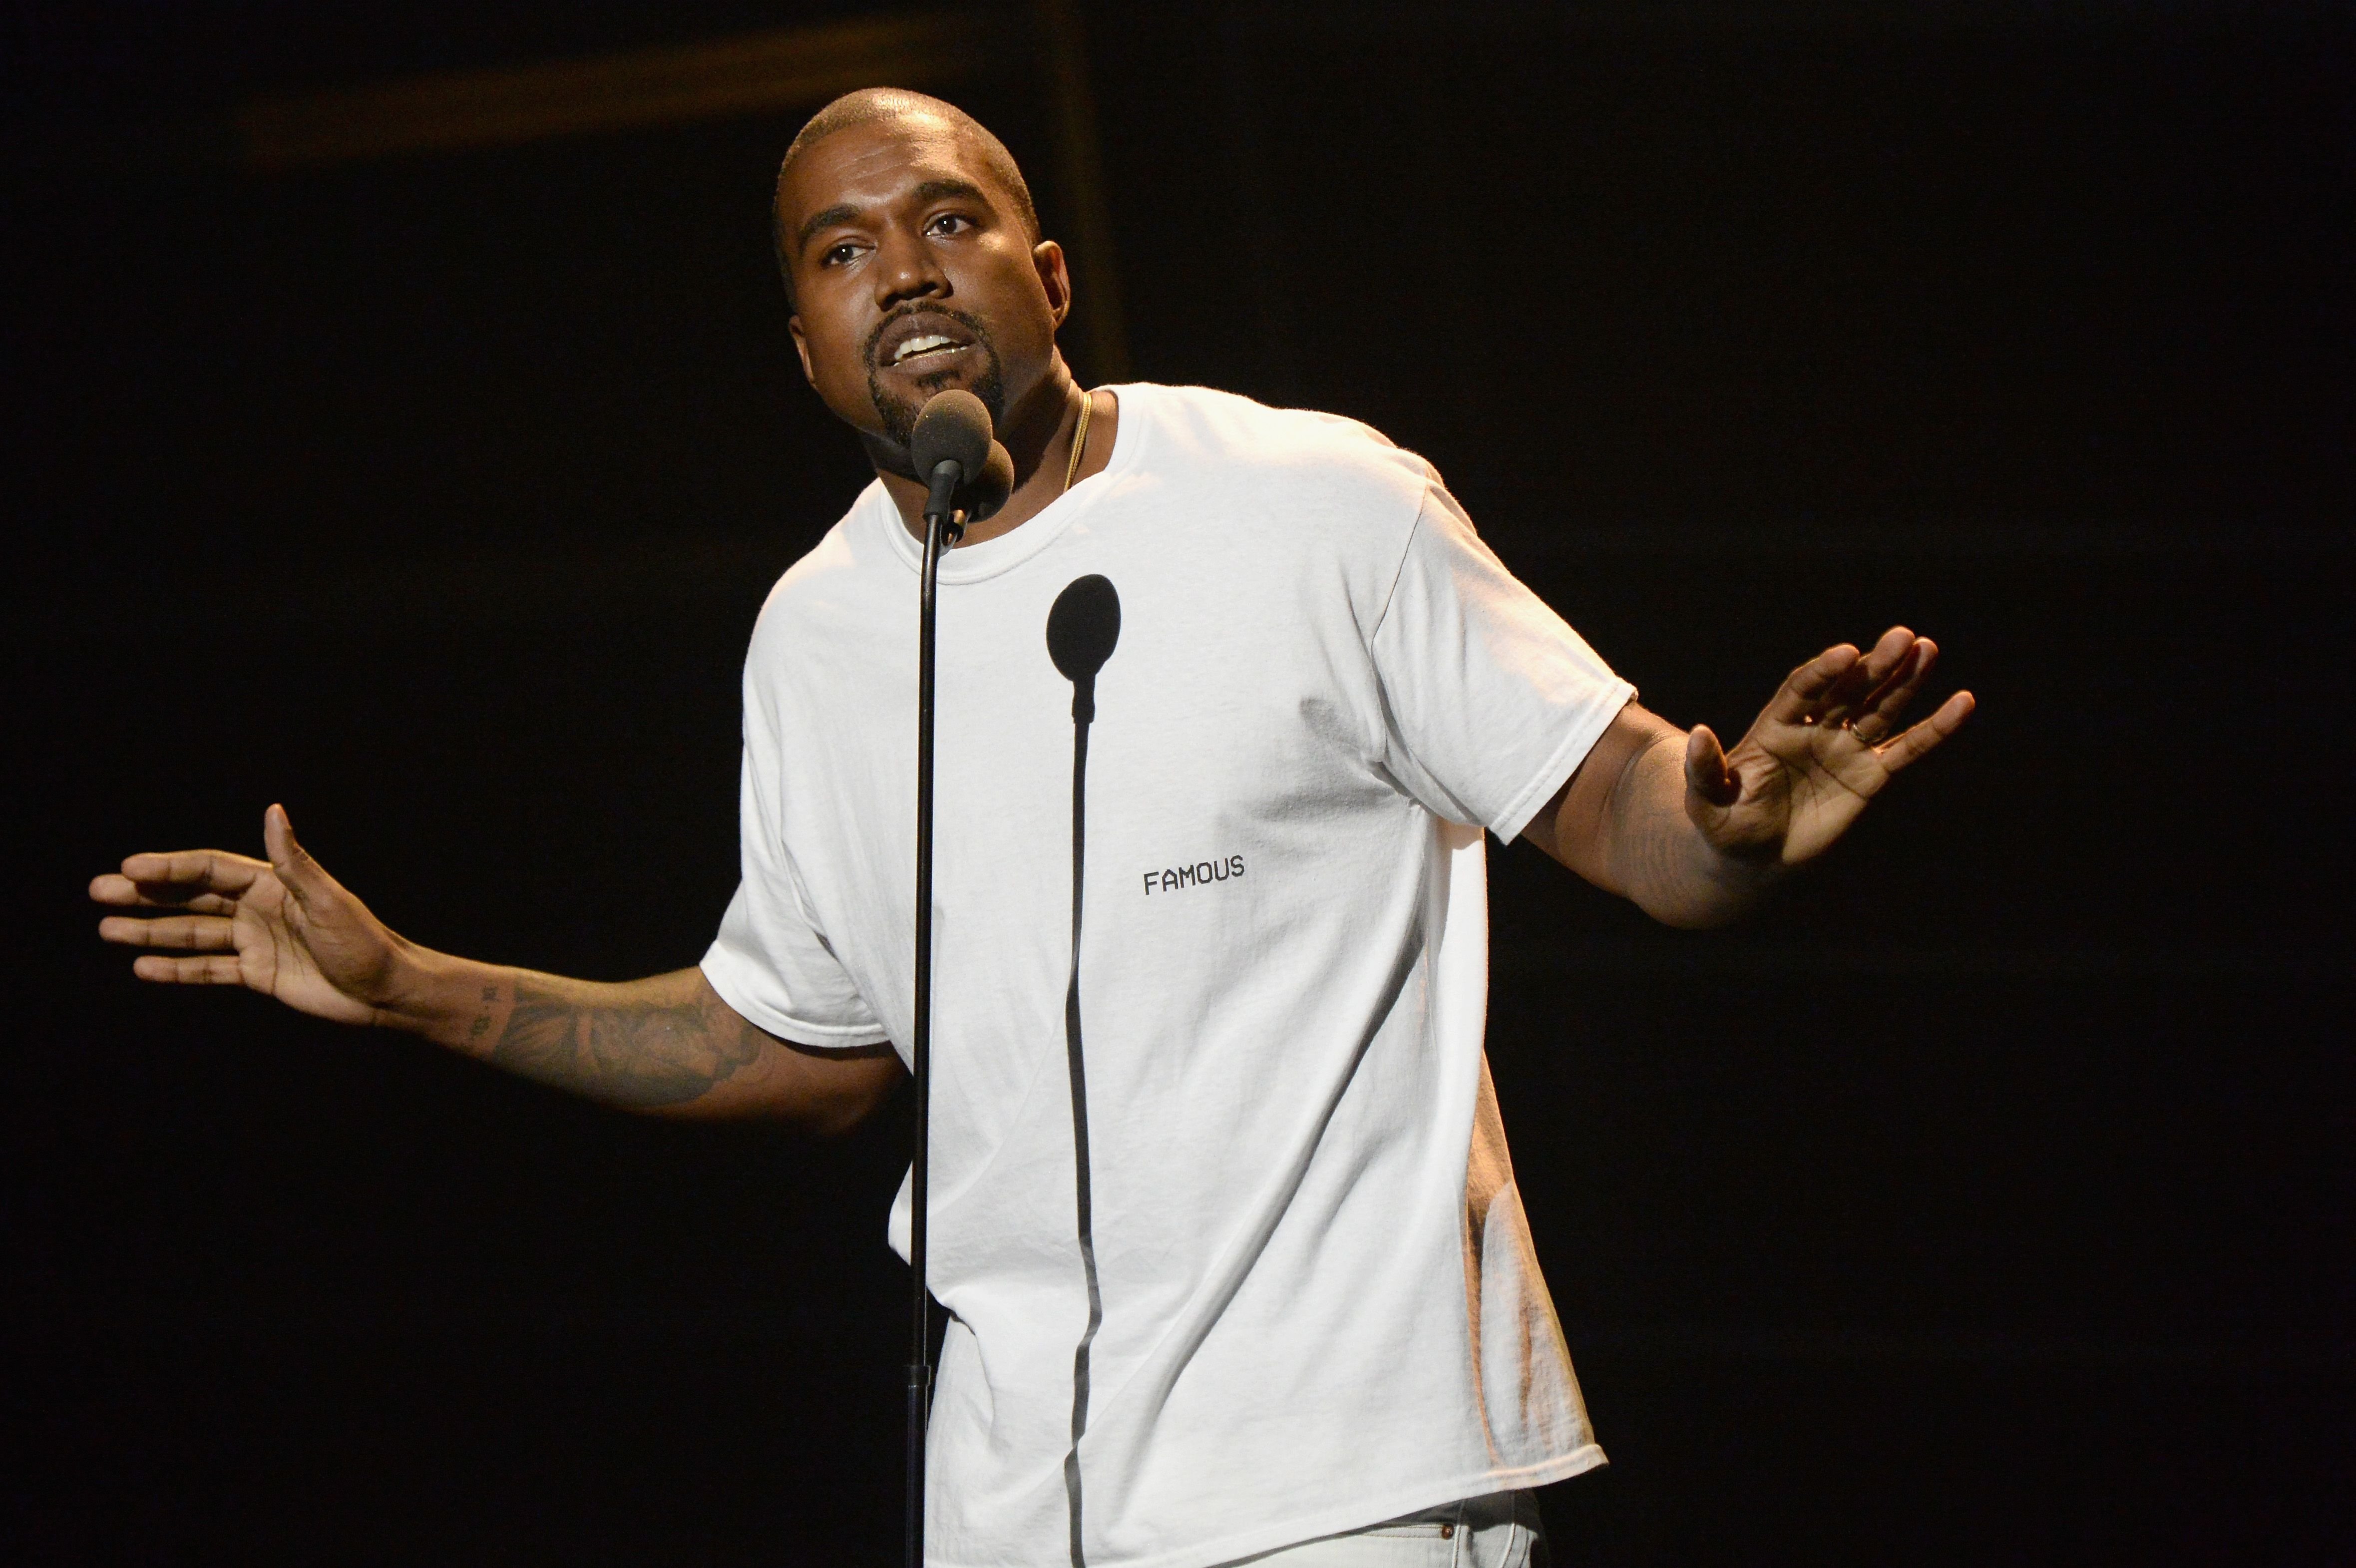 Kanye West speaks onstage during the 2016 MTV Video Music Awards at Madison Square Garden on August 28, 2016 in New York City. | Source: Getty Images